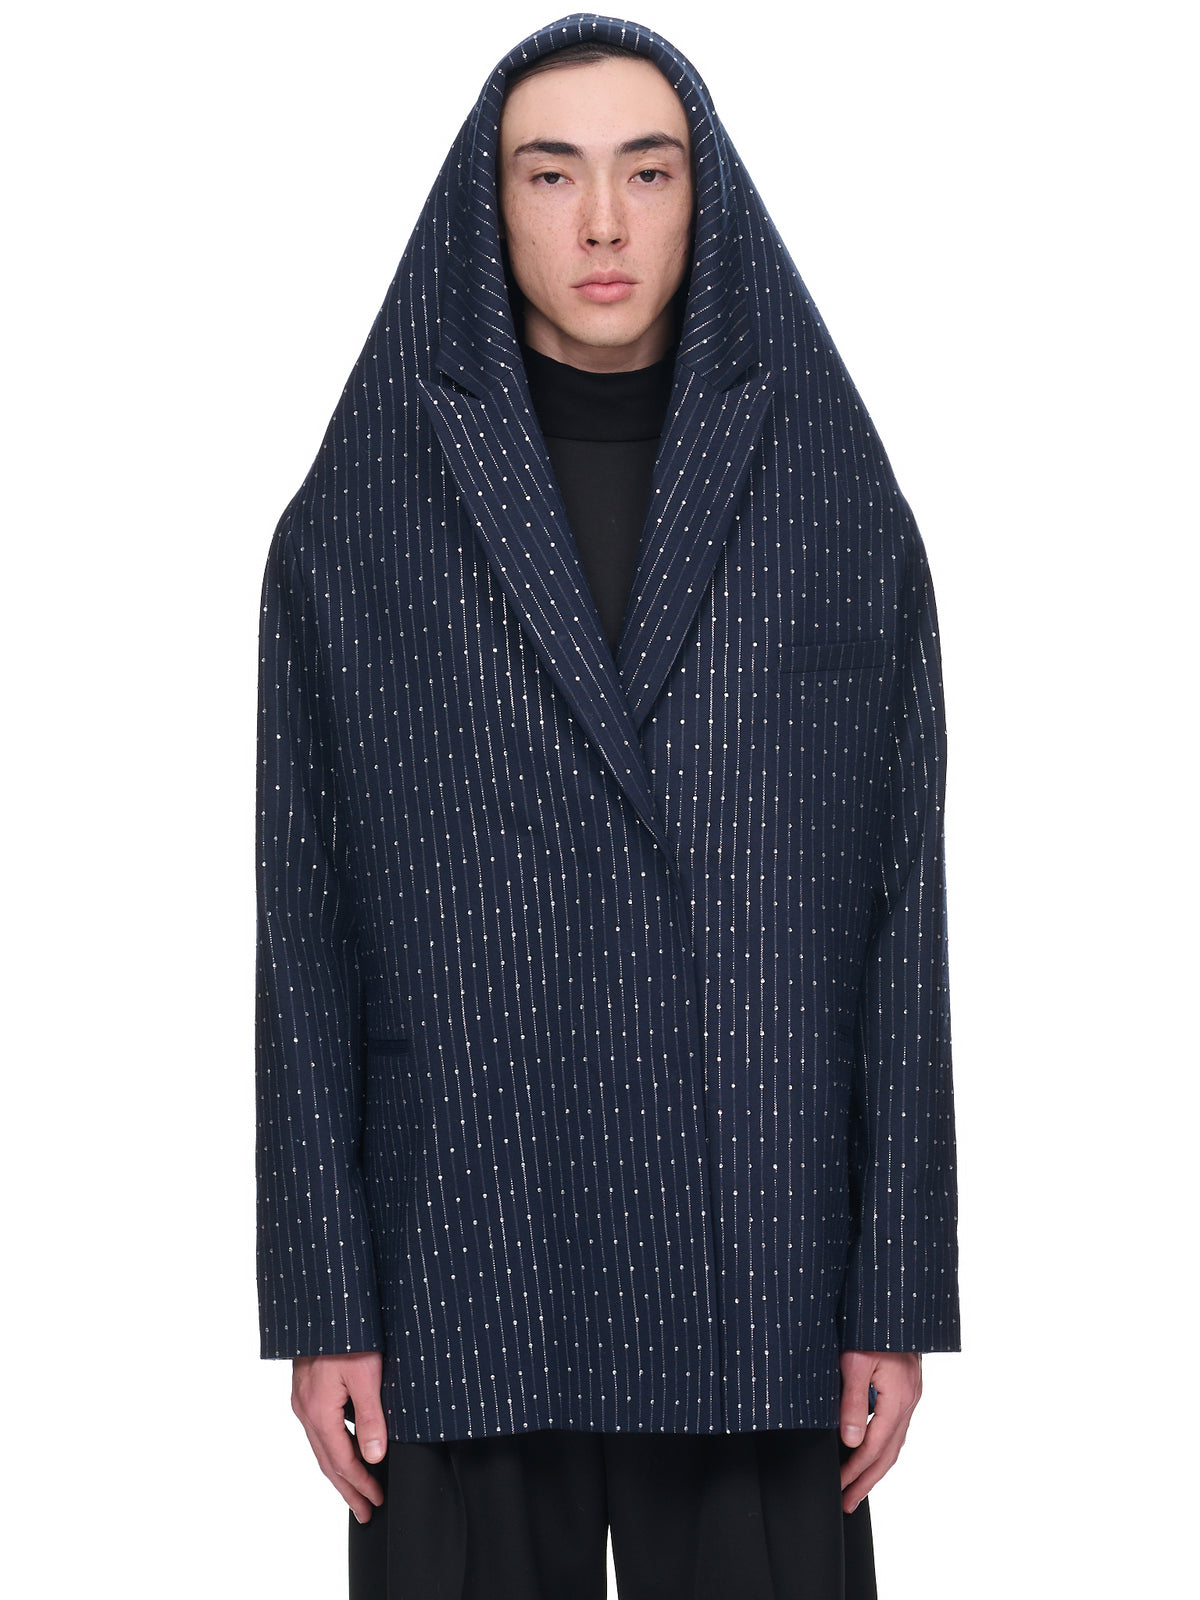 Crystal Hooded Jacket (COPV31112-NAVY-SILVER)